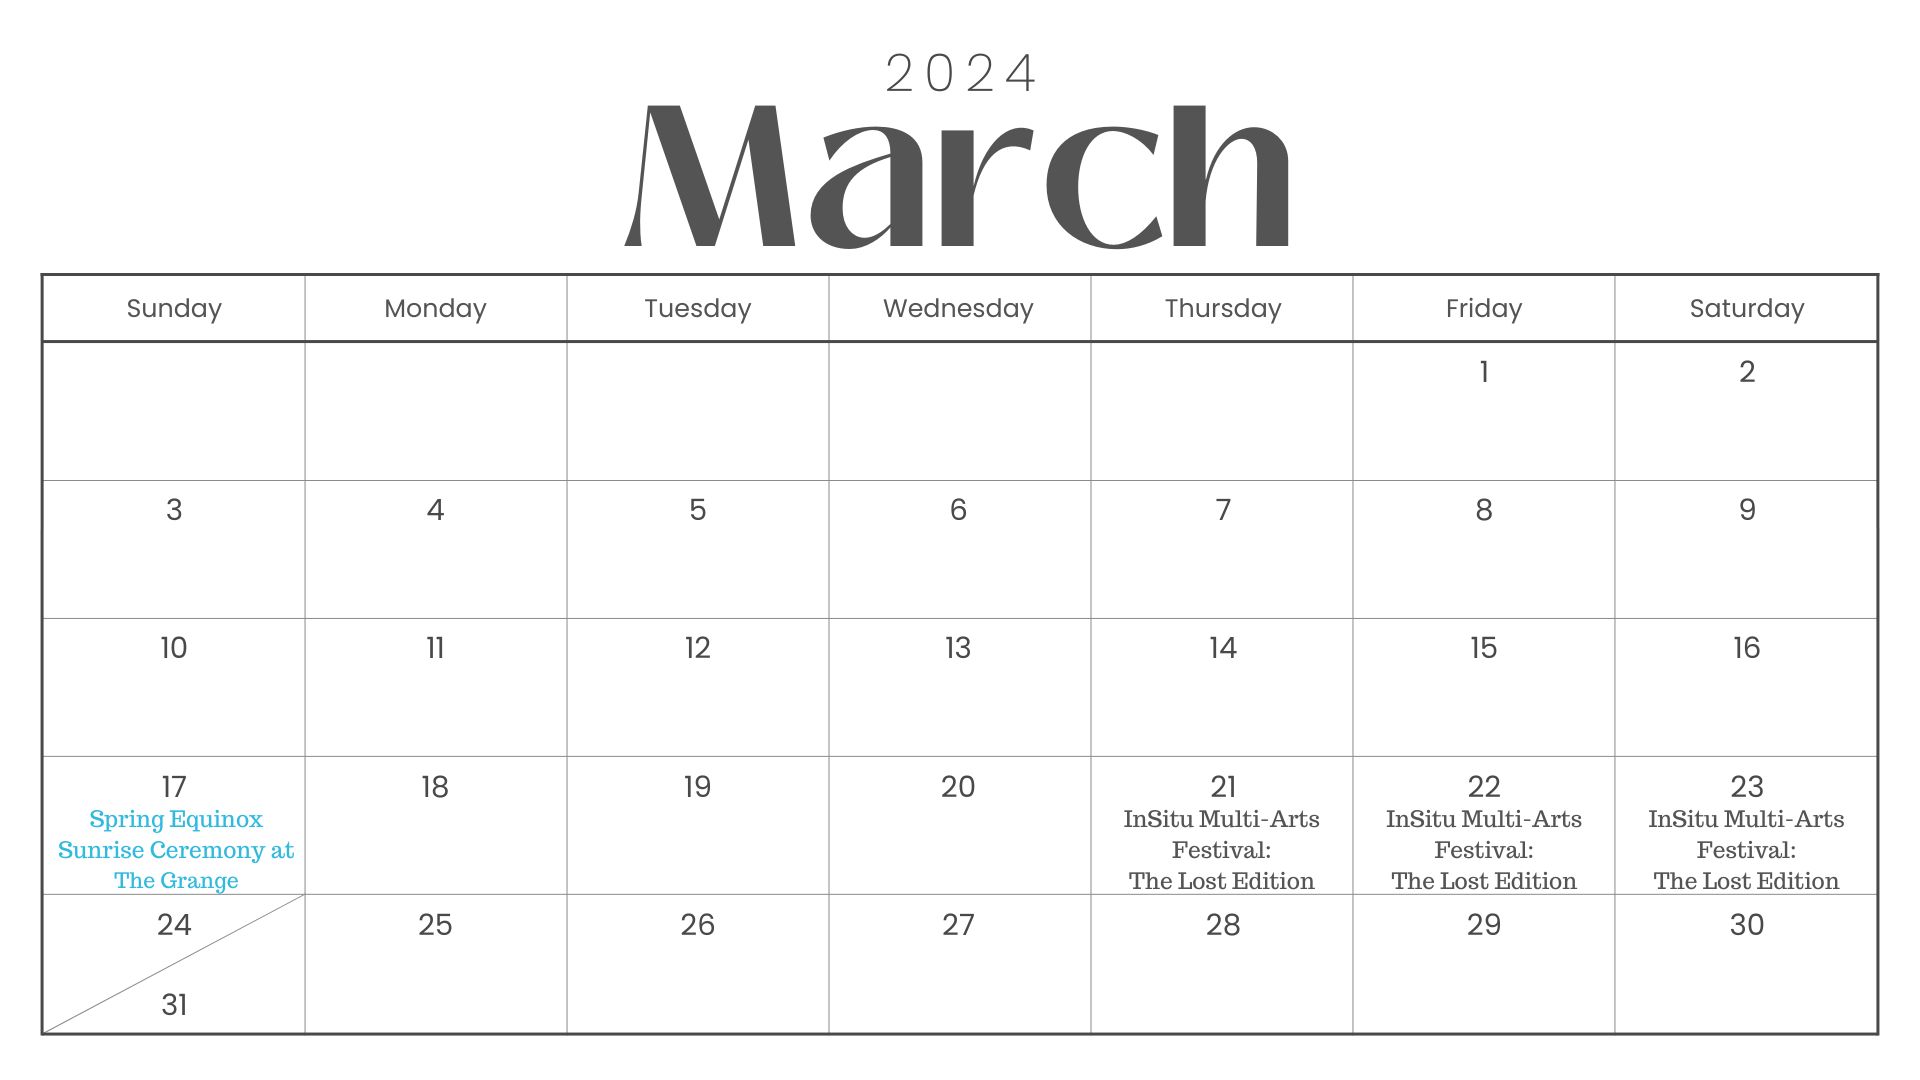 Heritage MARCH 2024 Events